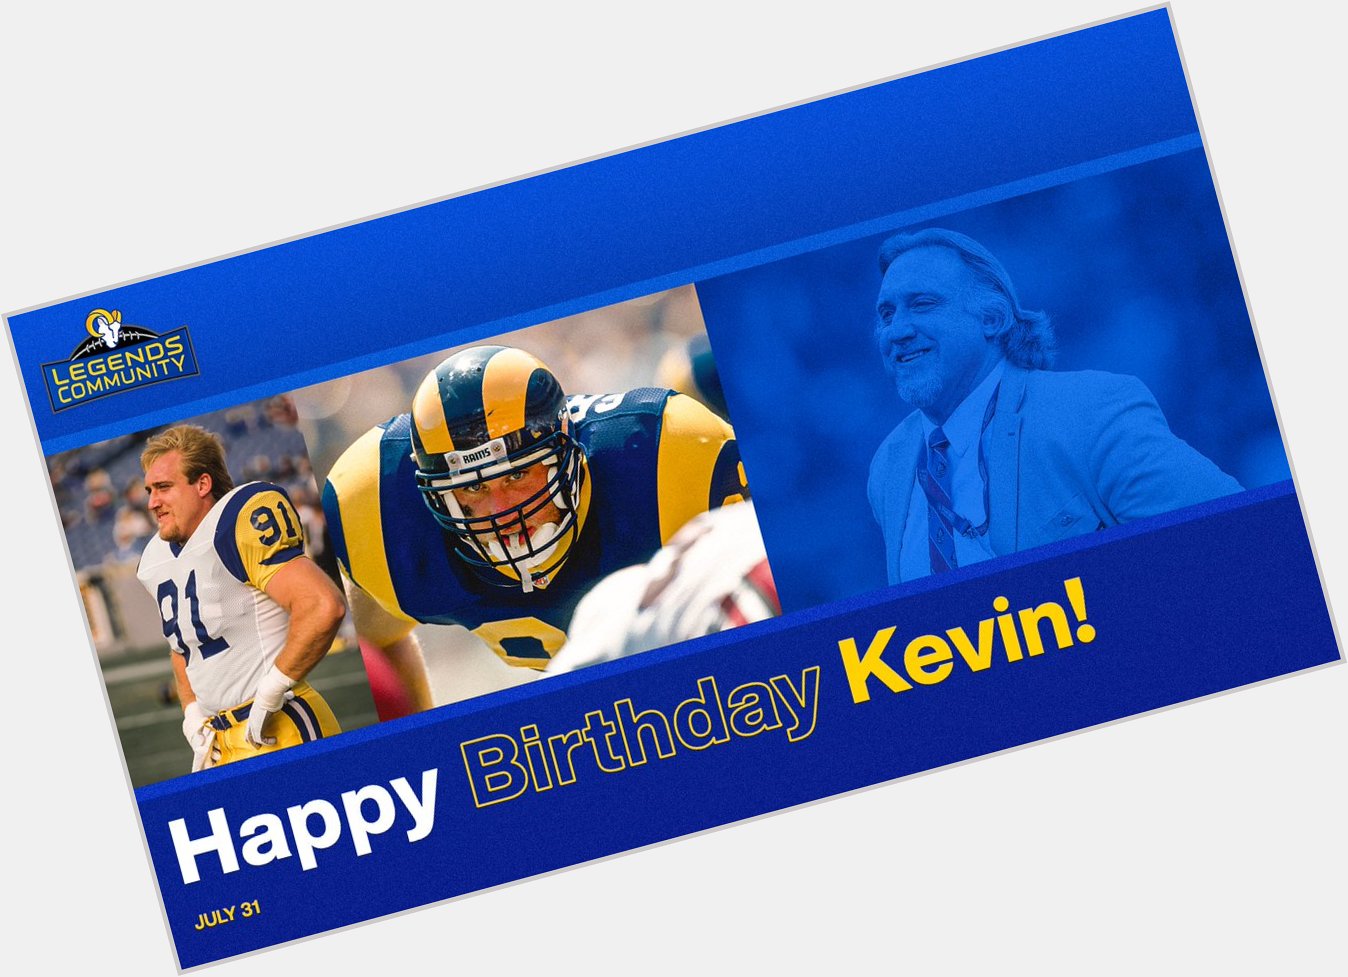   Happy birthday to the sacking machine, Kevin Greene!

Hope today s a great one,  